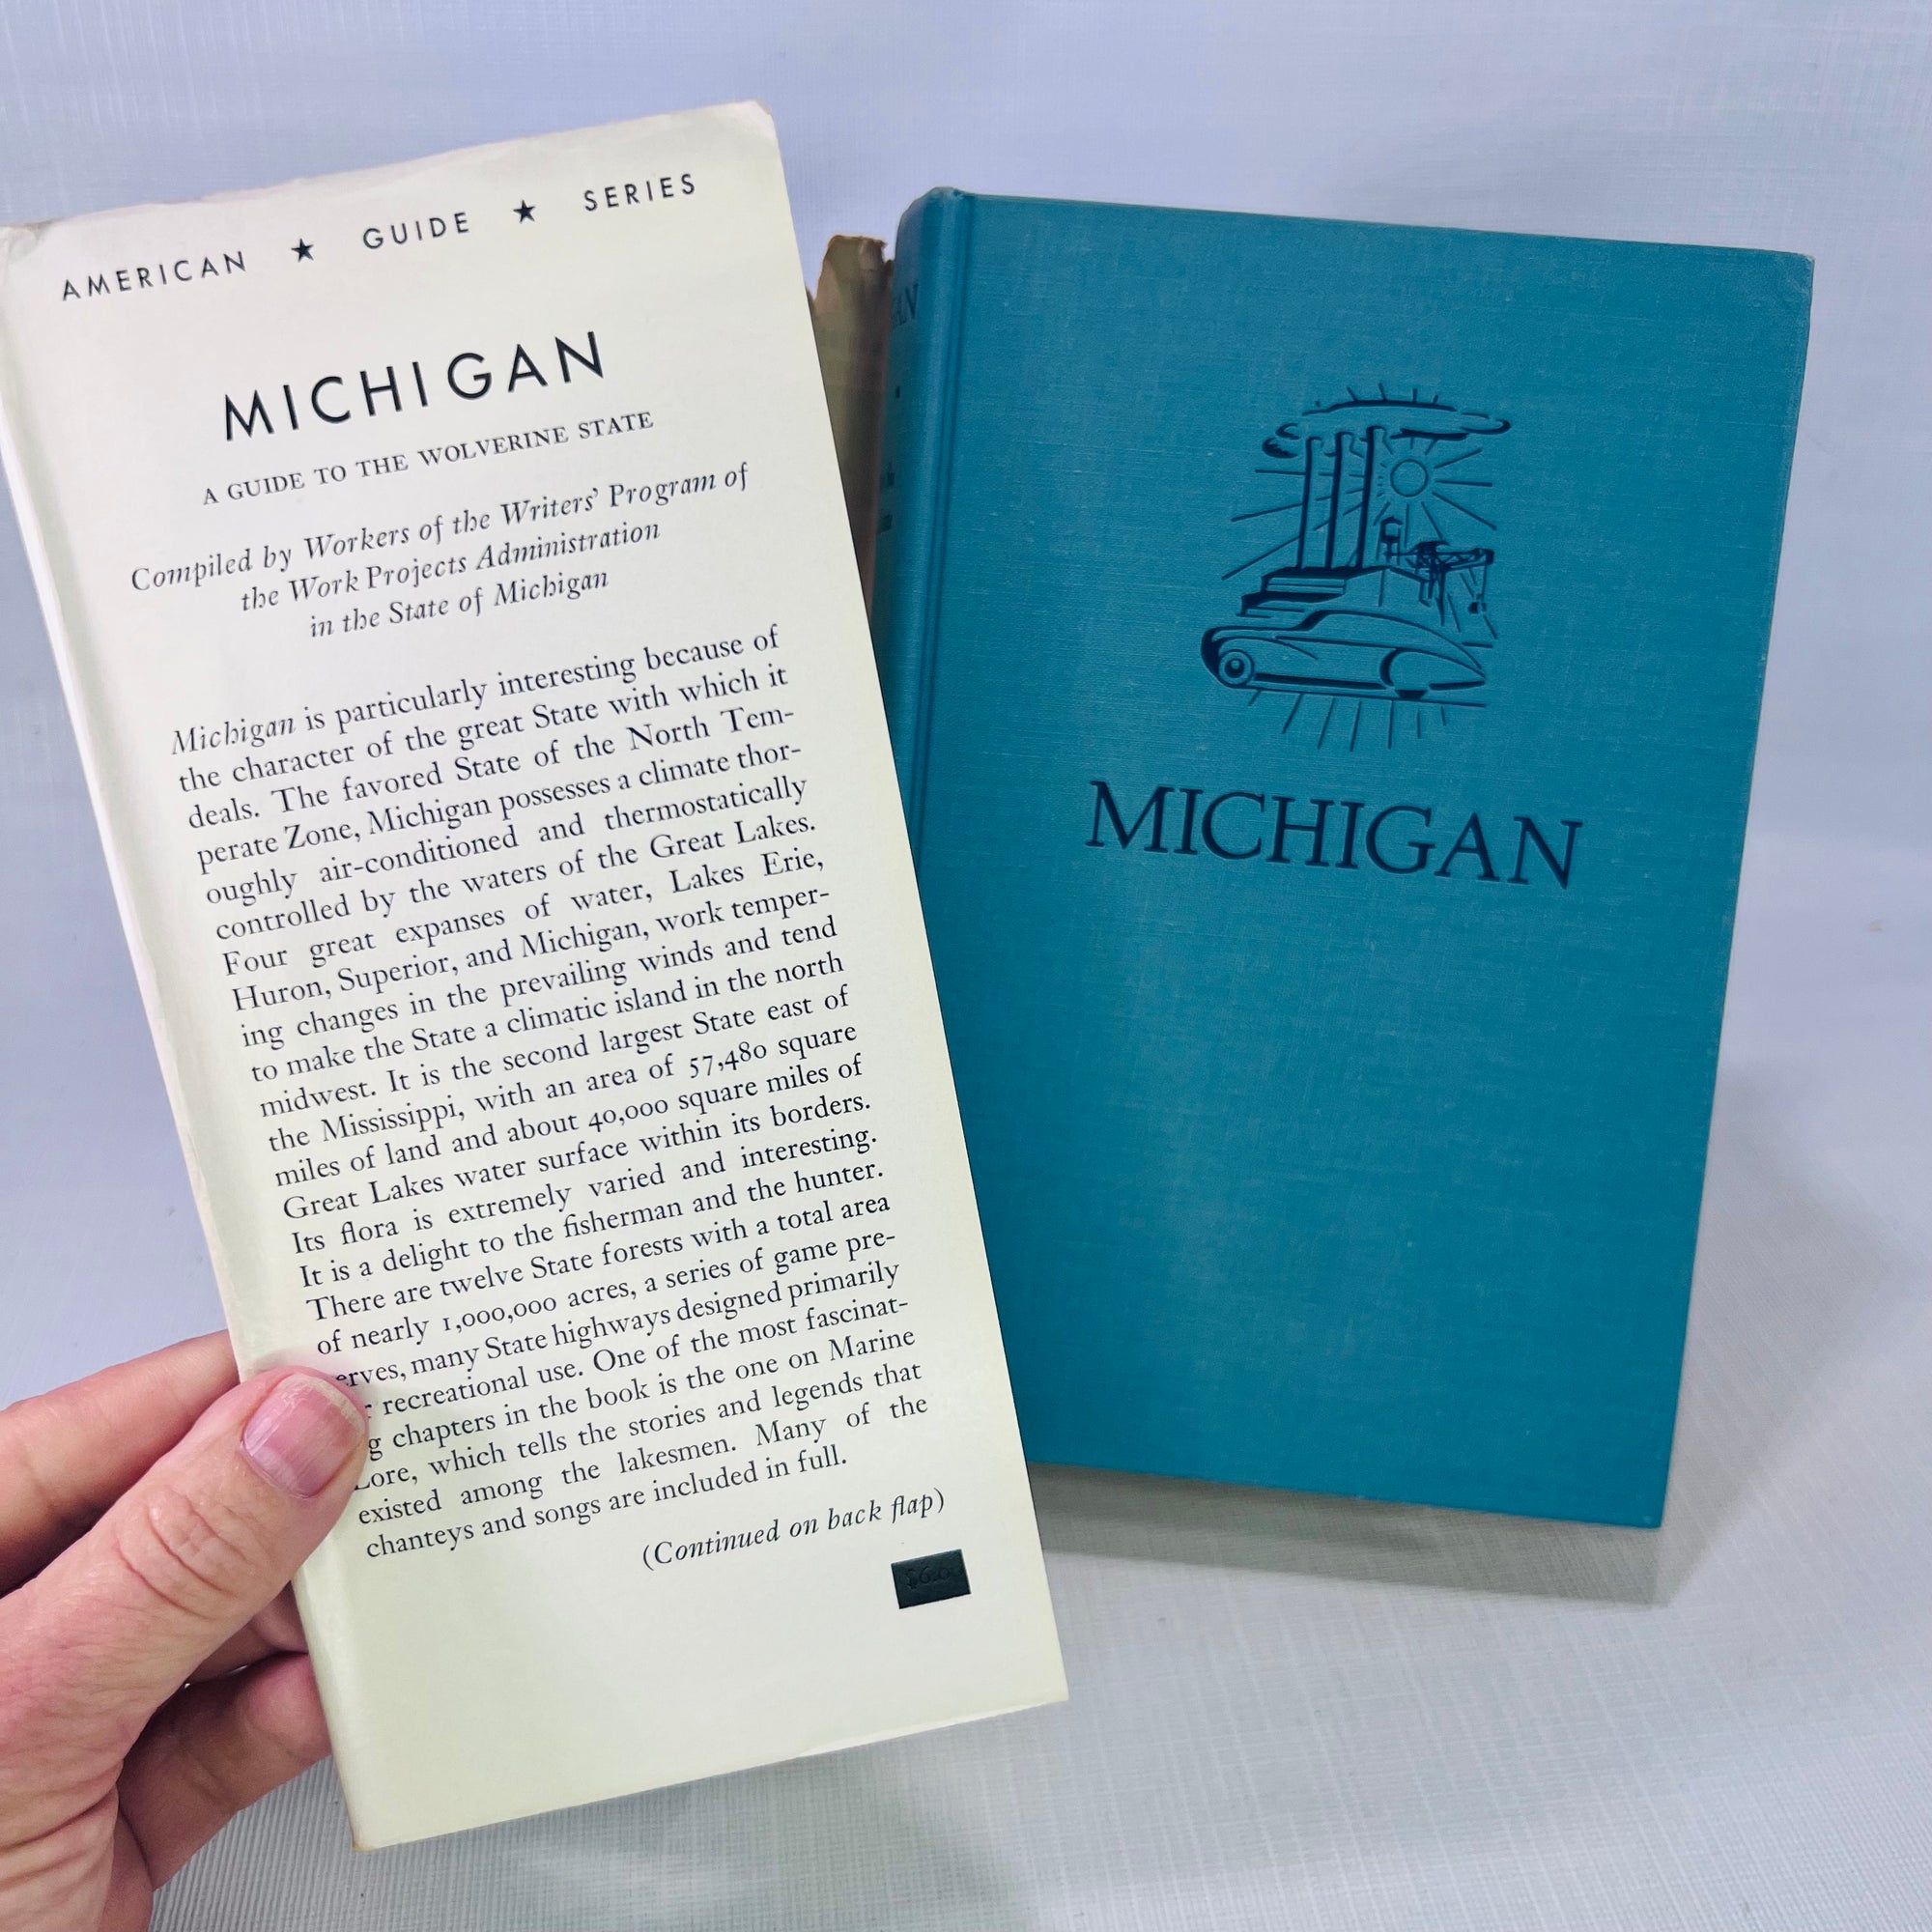 Michigan A Guide to the Wolverine State compiled by workers of the State of Michigan 1964 an American Guide Series Oxford University Press